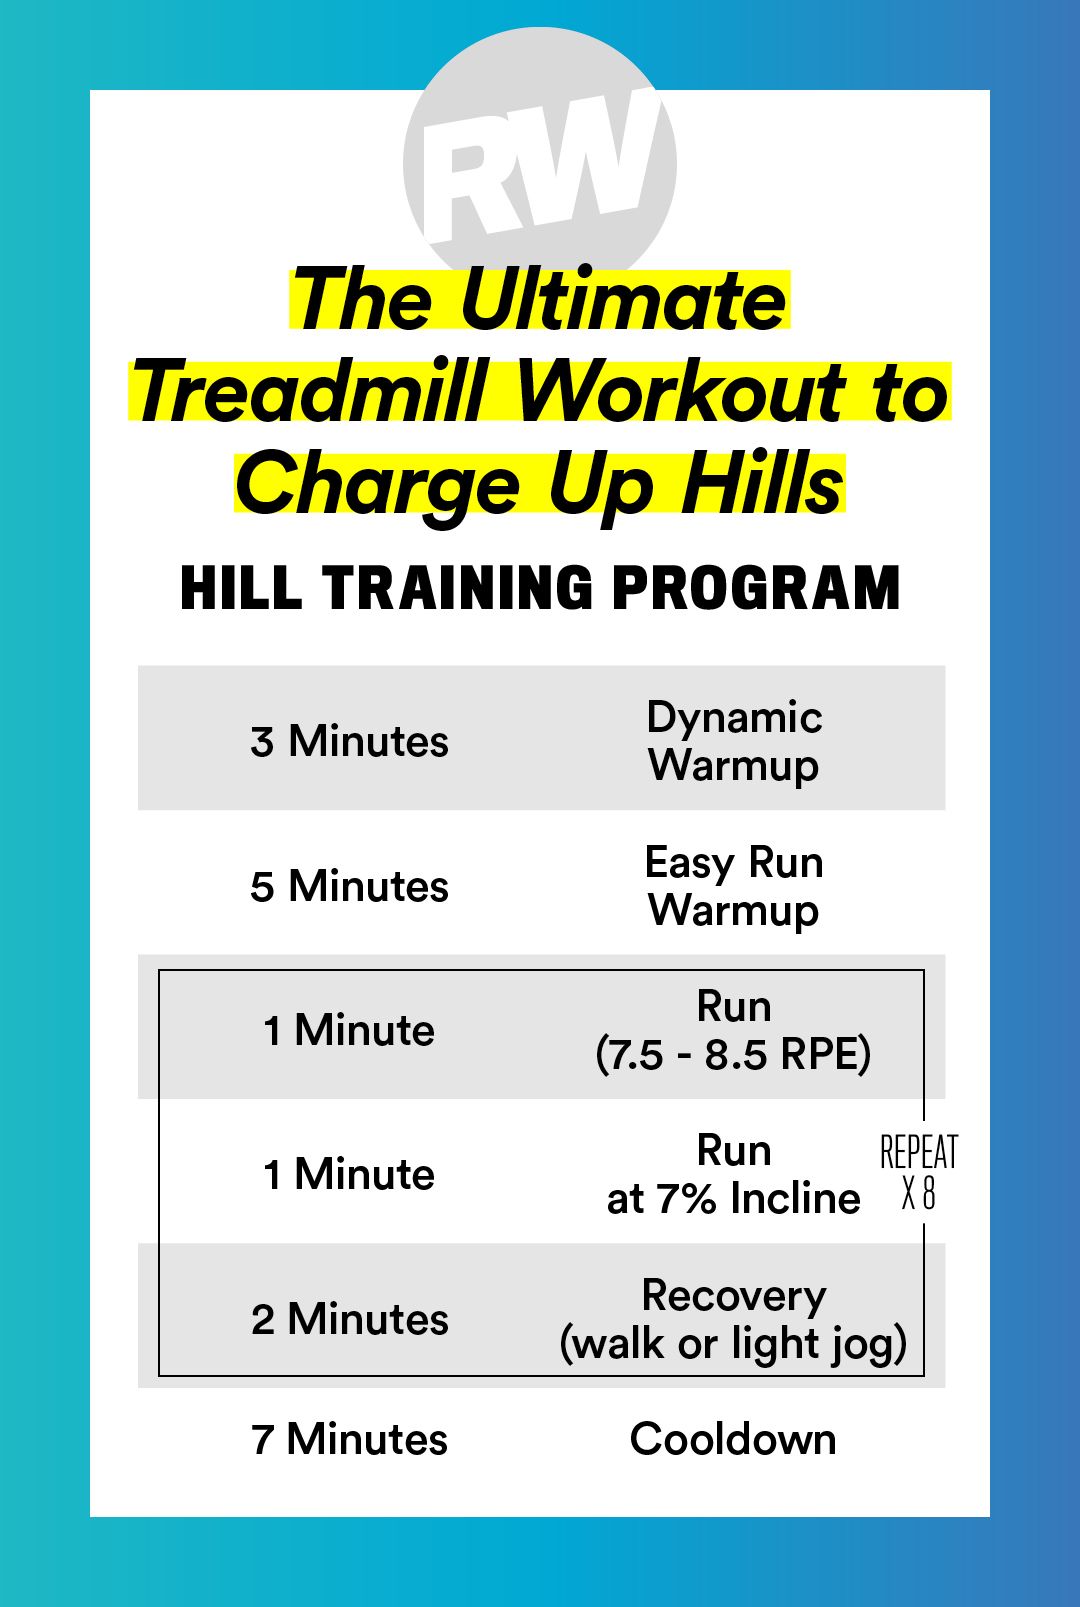 Hill Sprints  Best Speed Workout for Strength and Injury Prevention -  RunToTheFinish